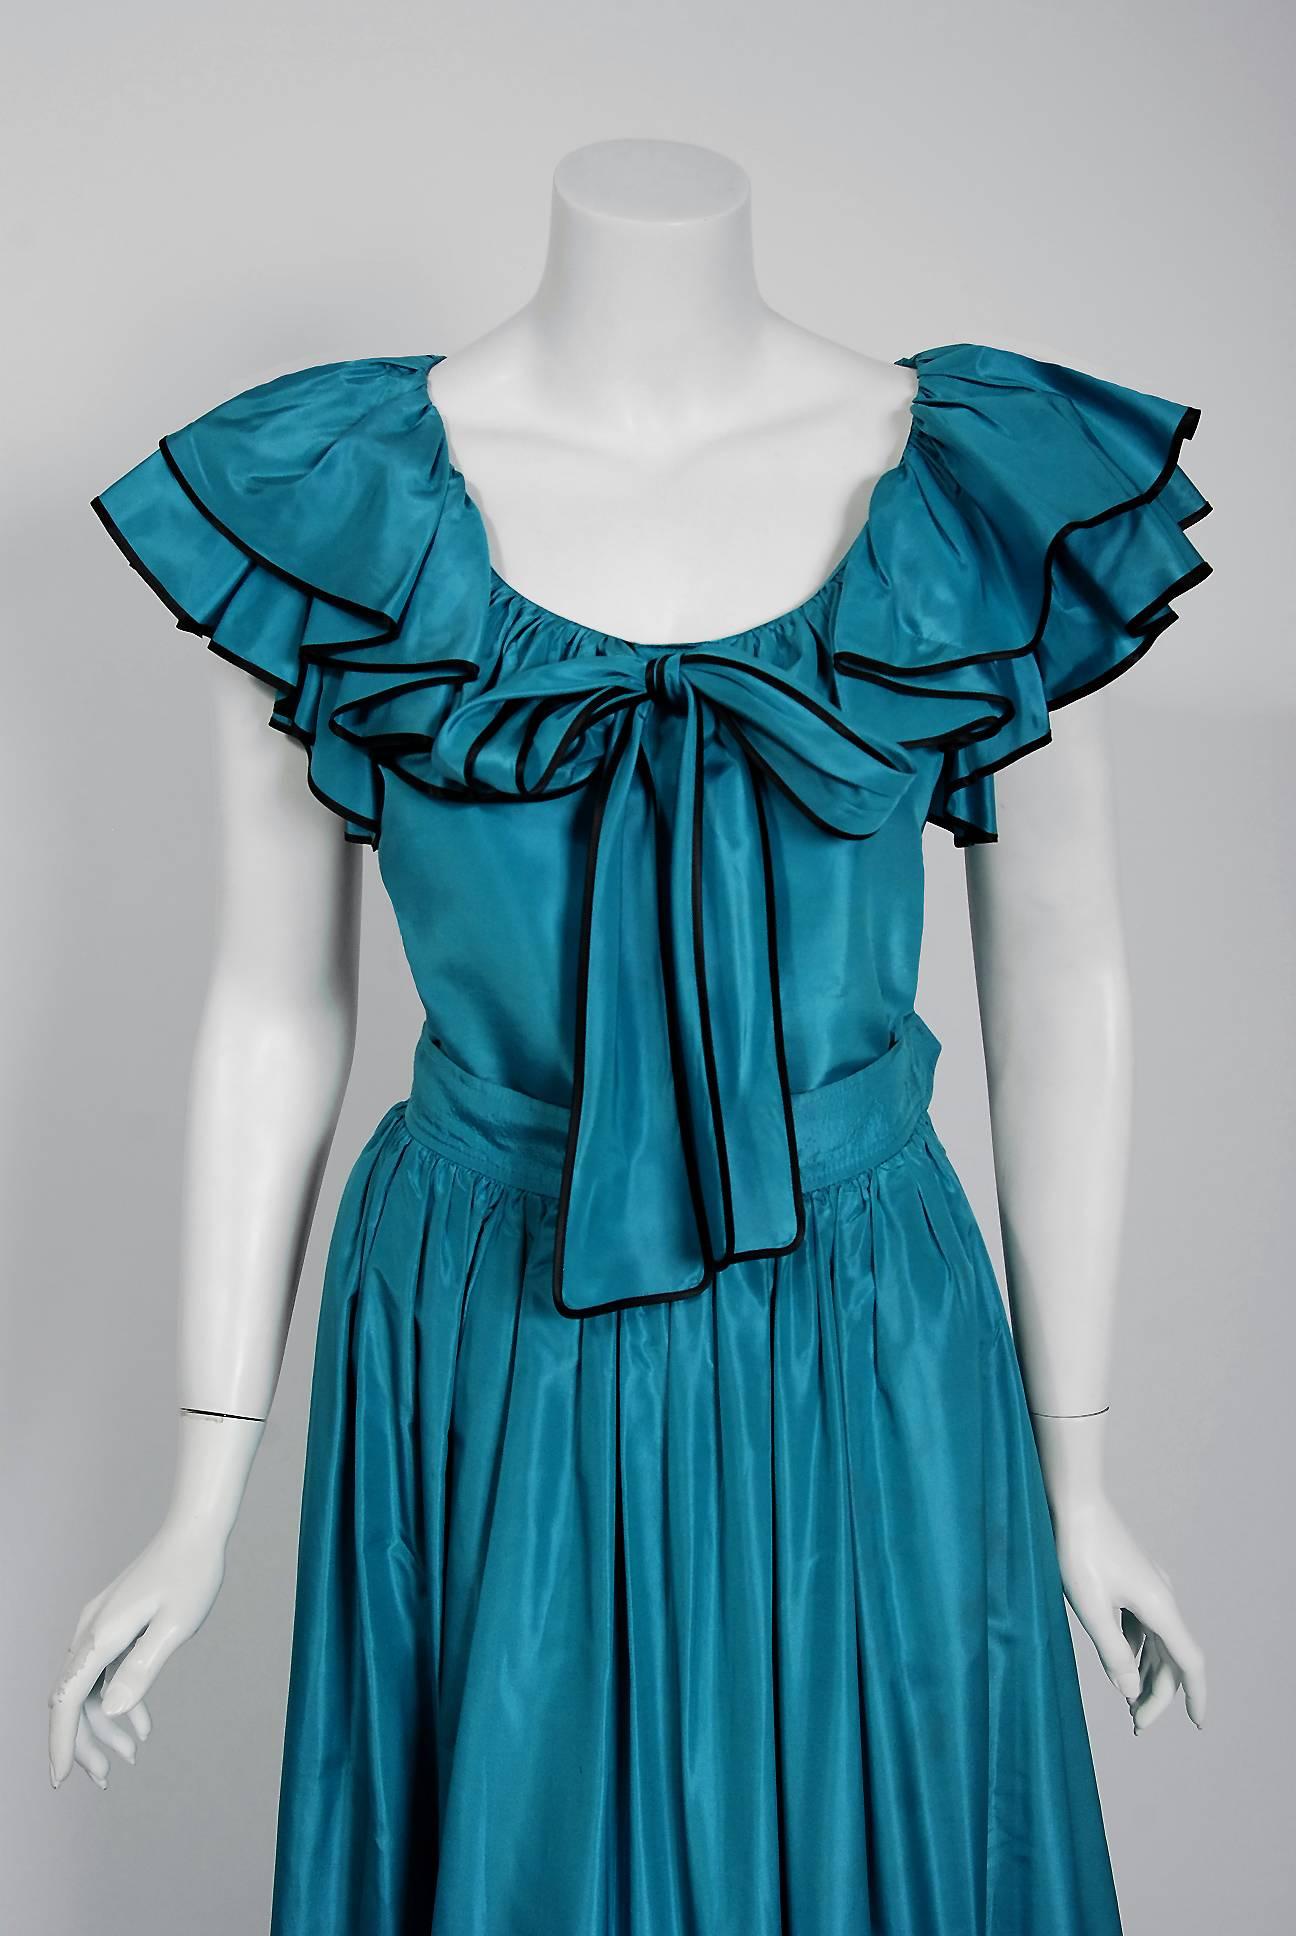 Romantic Yves Saint Laurent turquoise blue silk taffeta ensemble from the infamous Rive Gauche collection during the mid-1970's. Pieces from this decade are very rare and are true examples of fashion history. I adore the black pipping along the